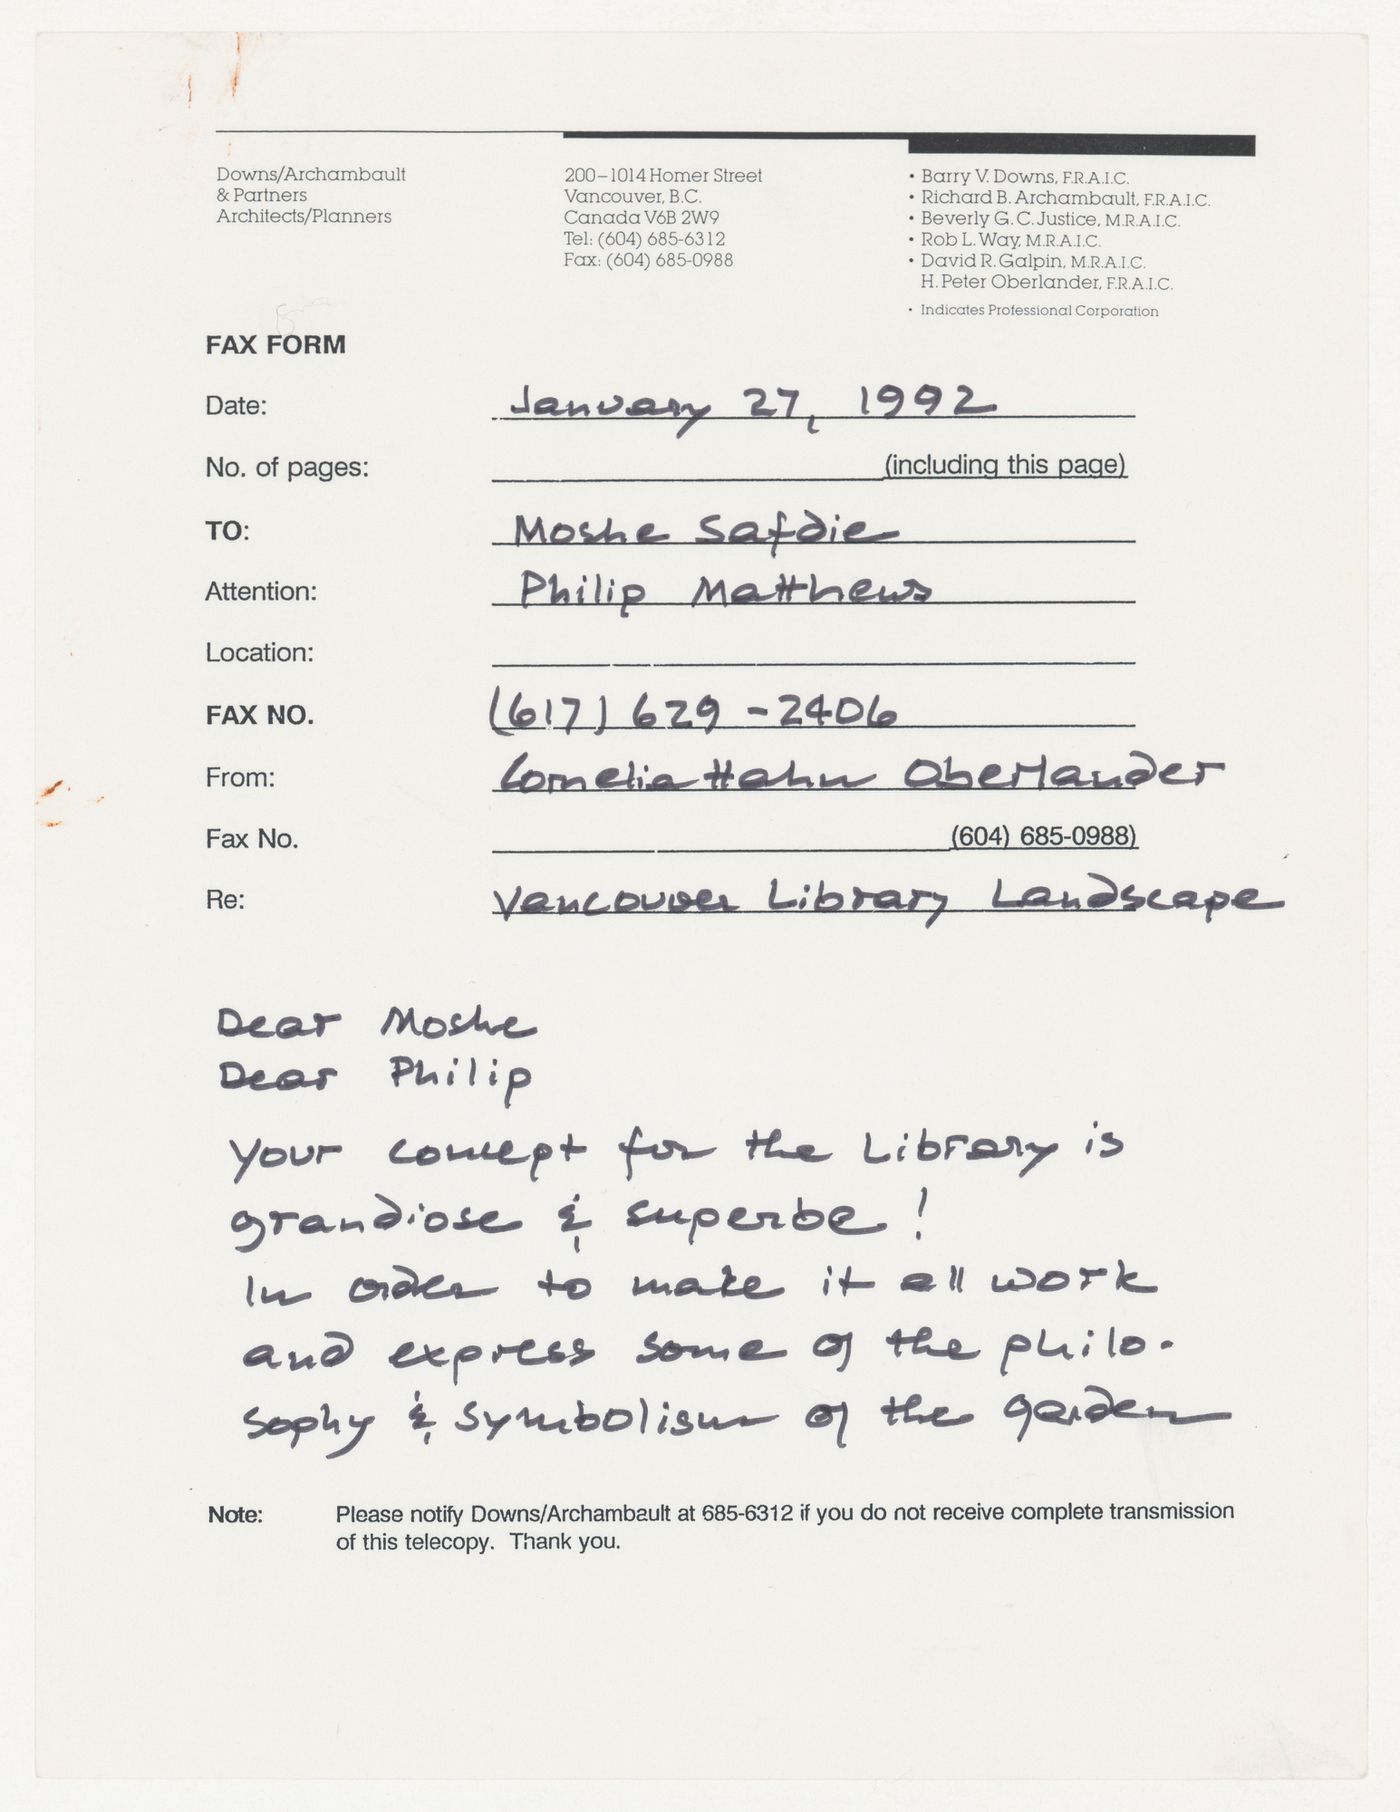 Letter from Cornelia Hahn Oberlander to Moshe Safdie about landscape design for Library Square, Vancouver, British Columbia, Canada